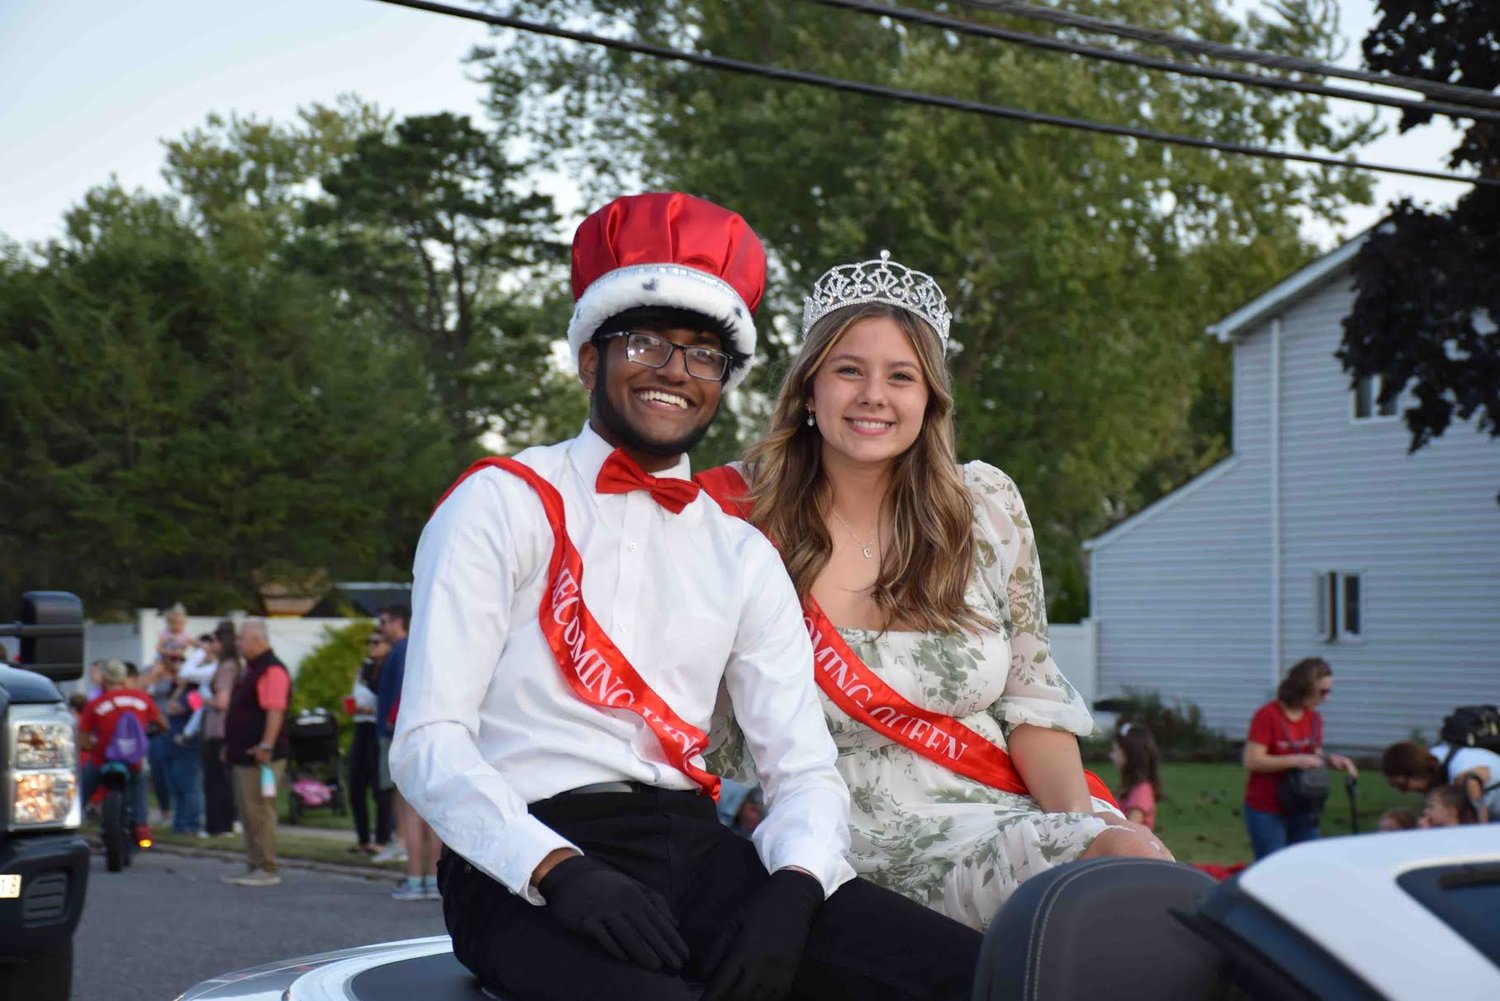 Connetquot students Mirza Mahim and Cara Hodulick were voted homecoming king and queen.